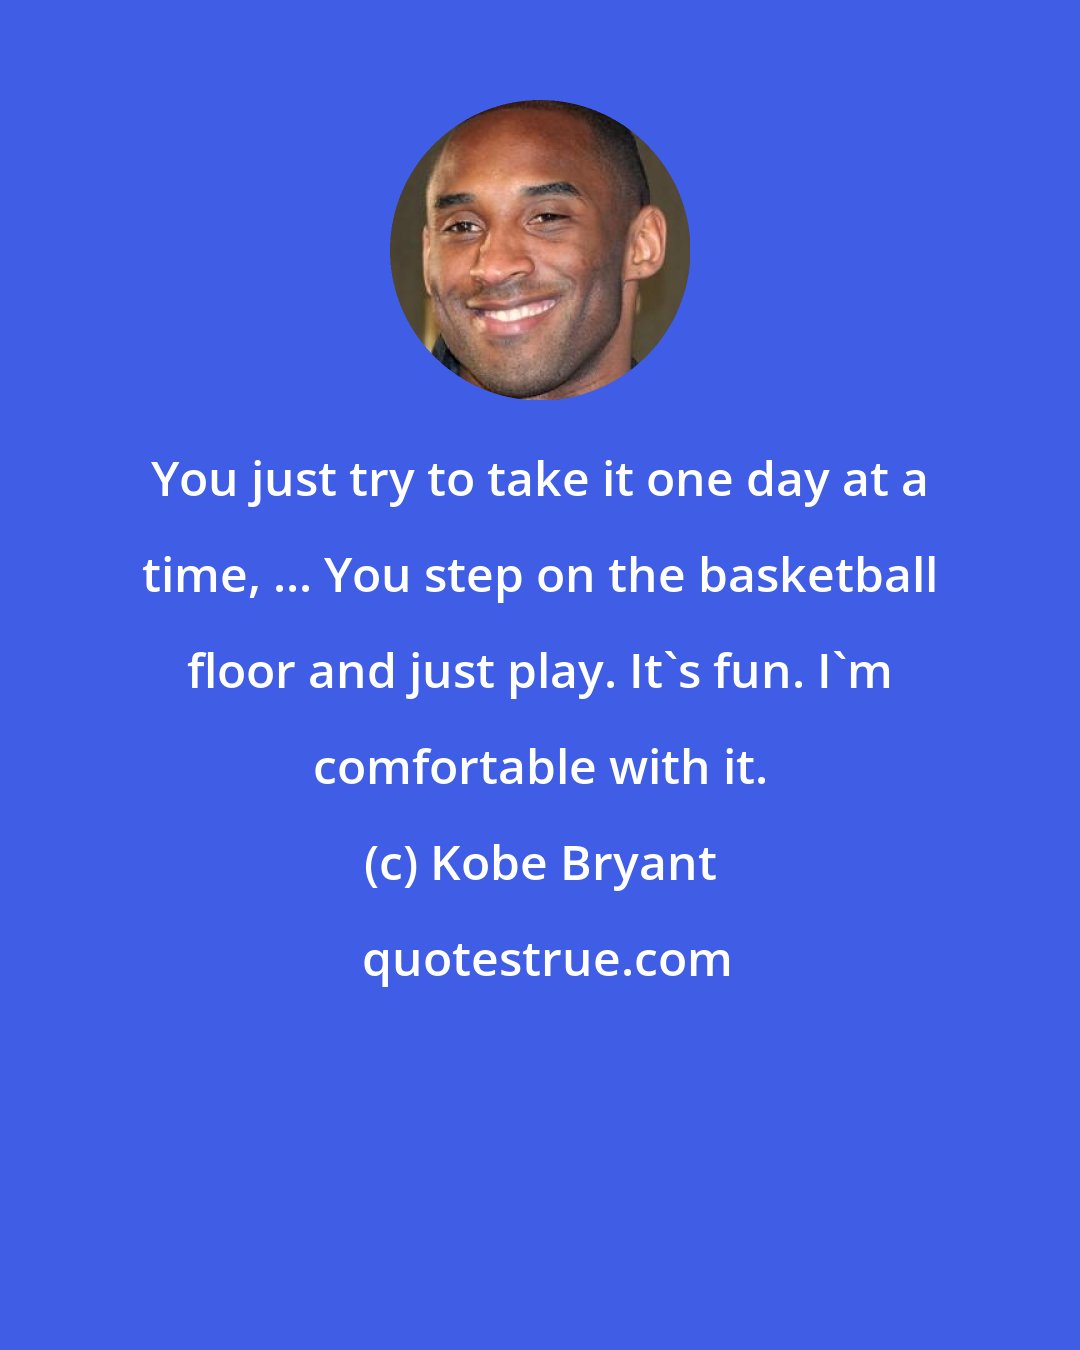 Kobe Bryant: You just try to take it one day at a time, ... You step on the basketball floor and just play. It's fun. I'm comfortable with it.